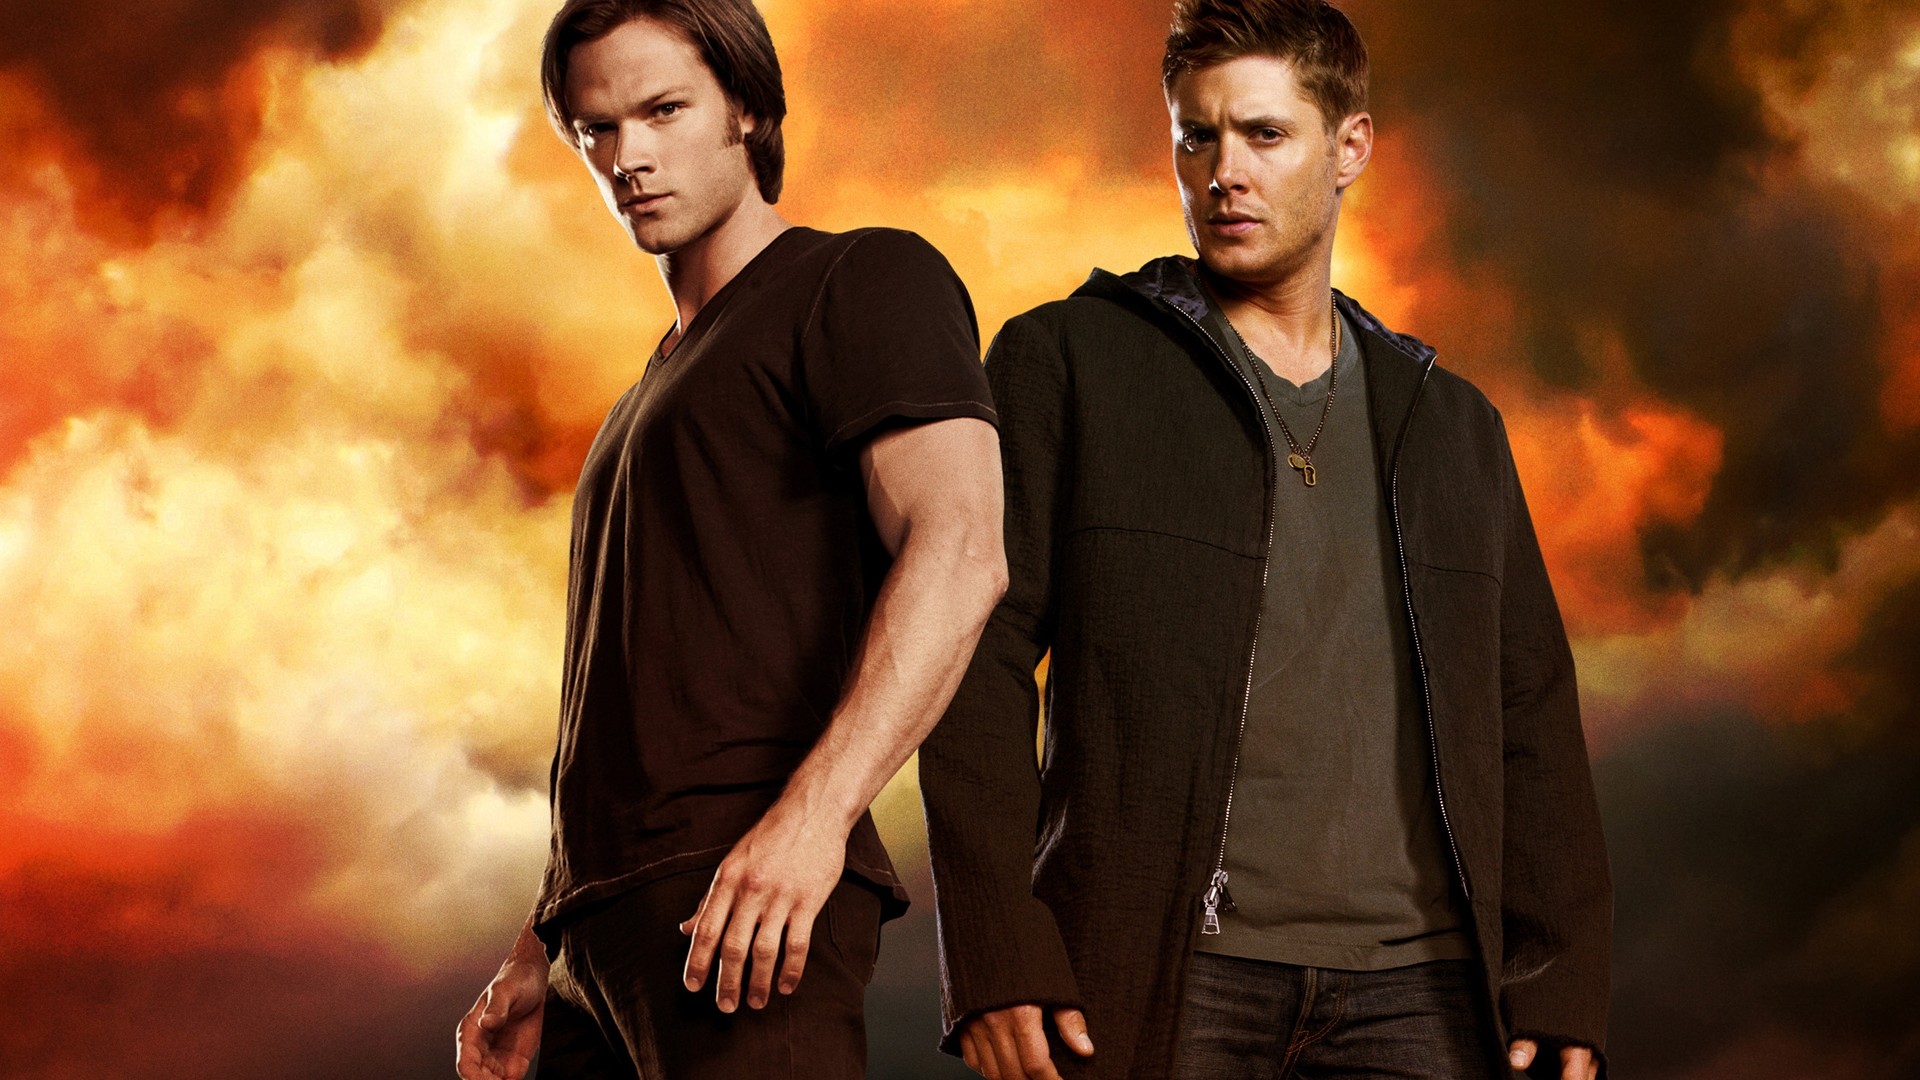 The best SUPERNATURAL background / wallpaper for any device